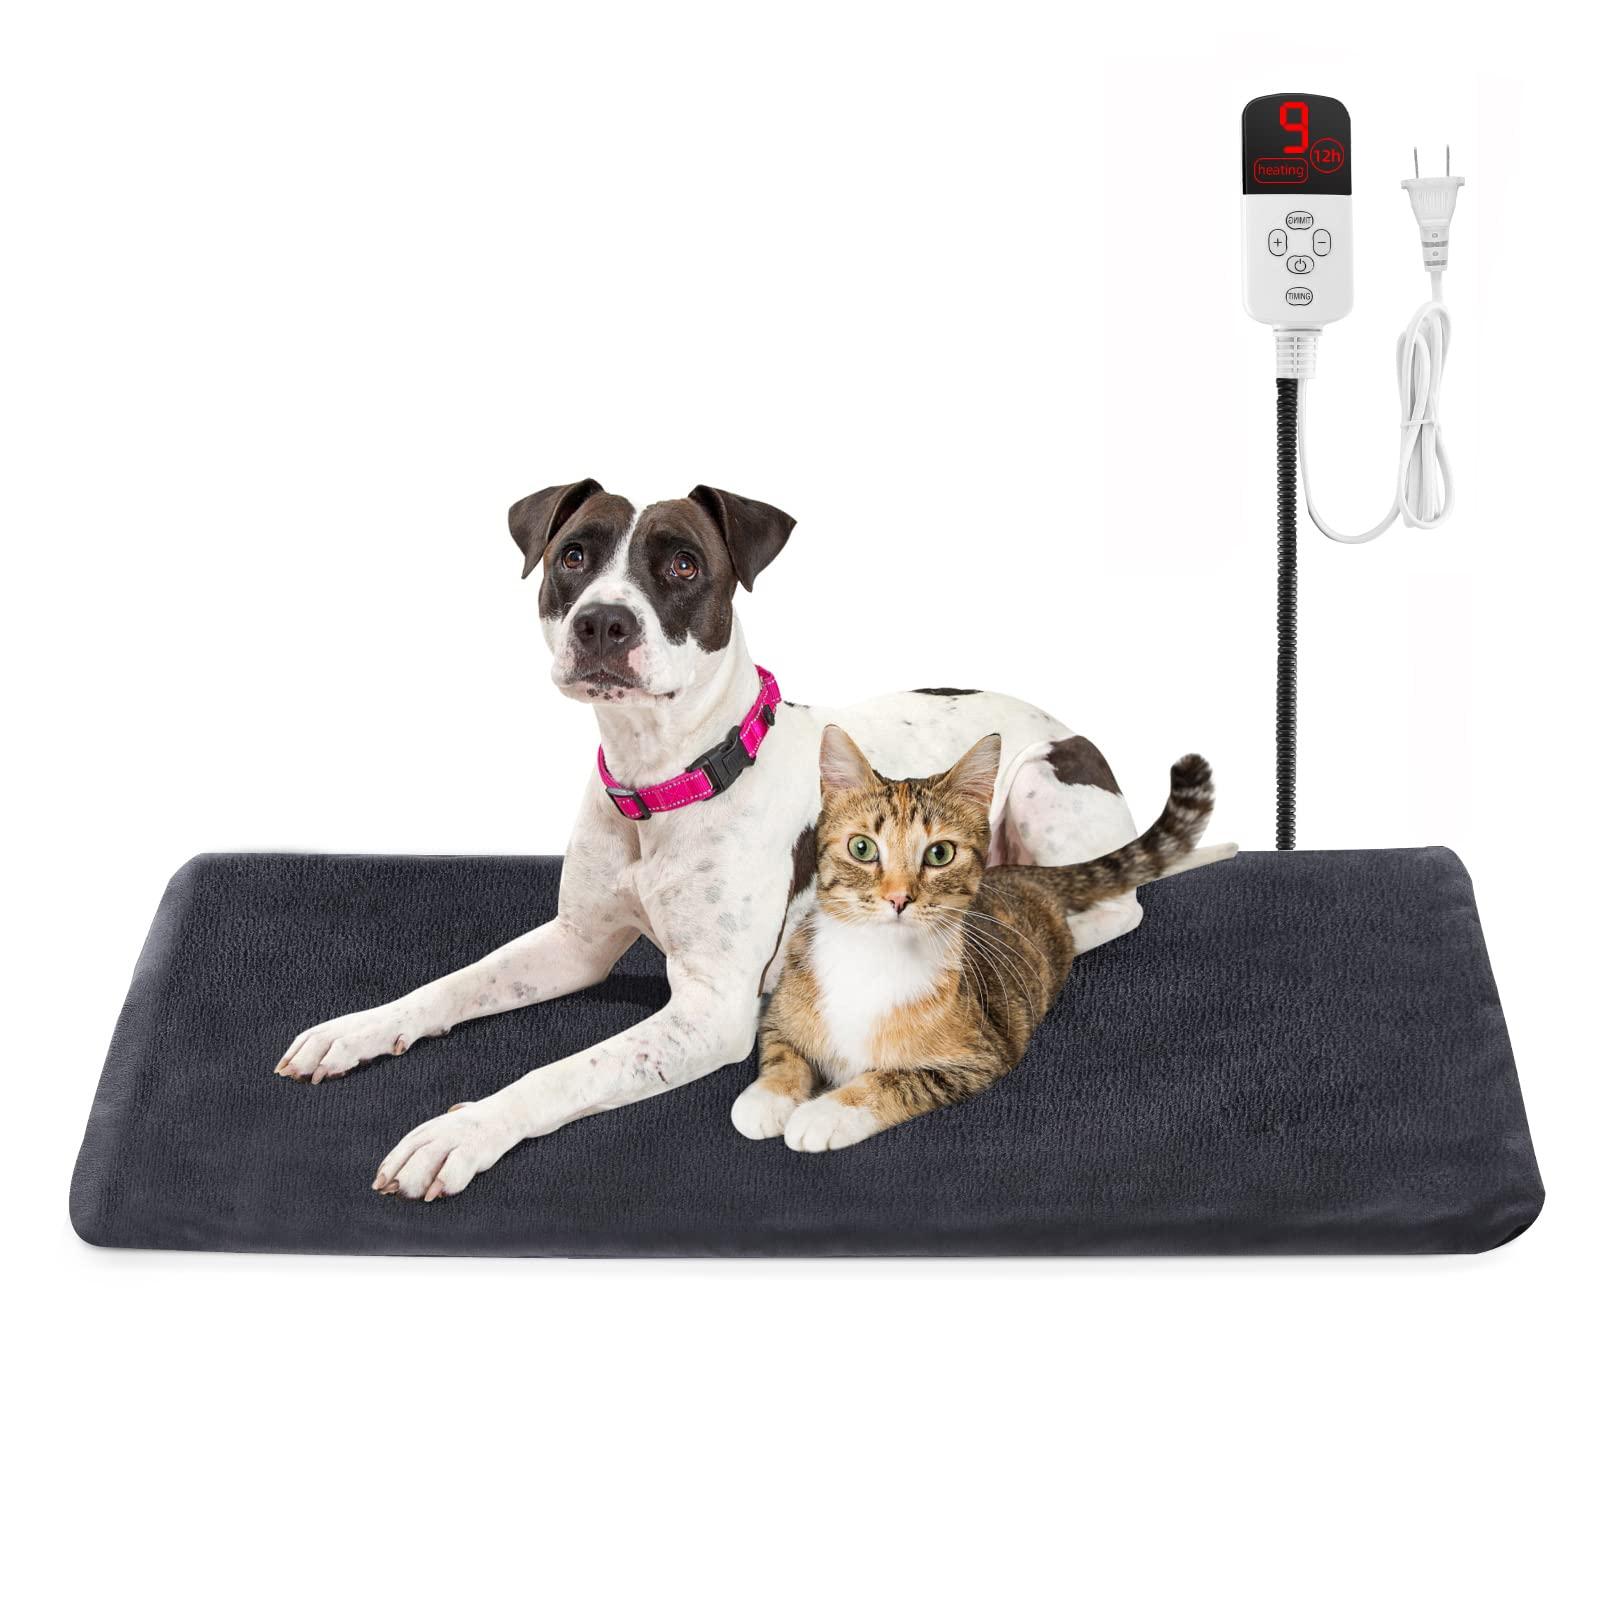 SoftGym Pet Heating Pad Dog Heating Pad Dog Cat Warming Pad Electric Heated Pad for Dogs and Cats Heating Pad Dogs Heated Mat for Dogs Indoor Warming Mat with Auto Power(S)